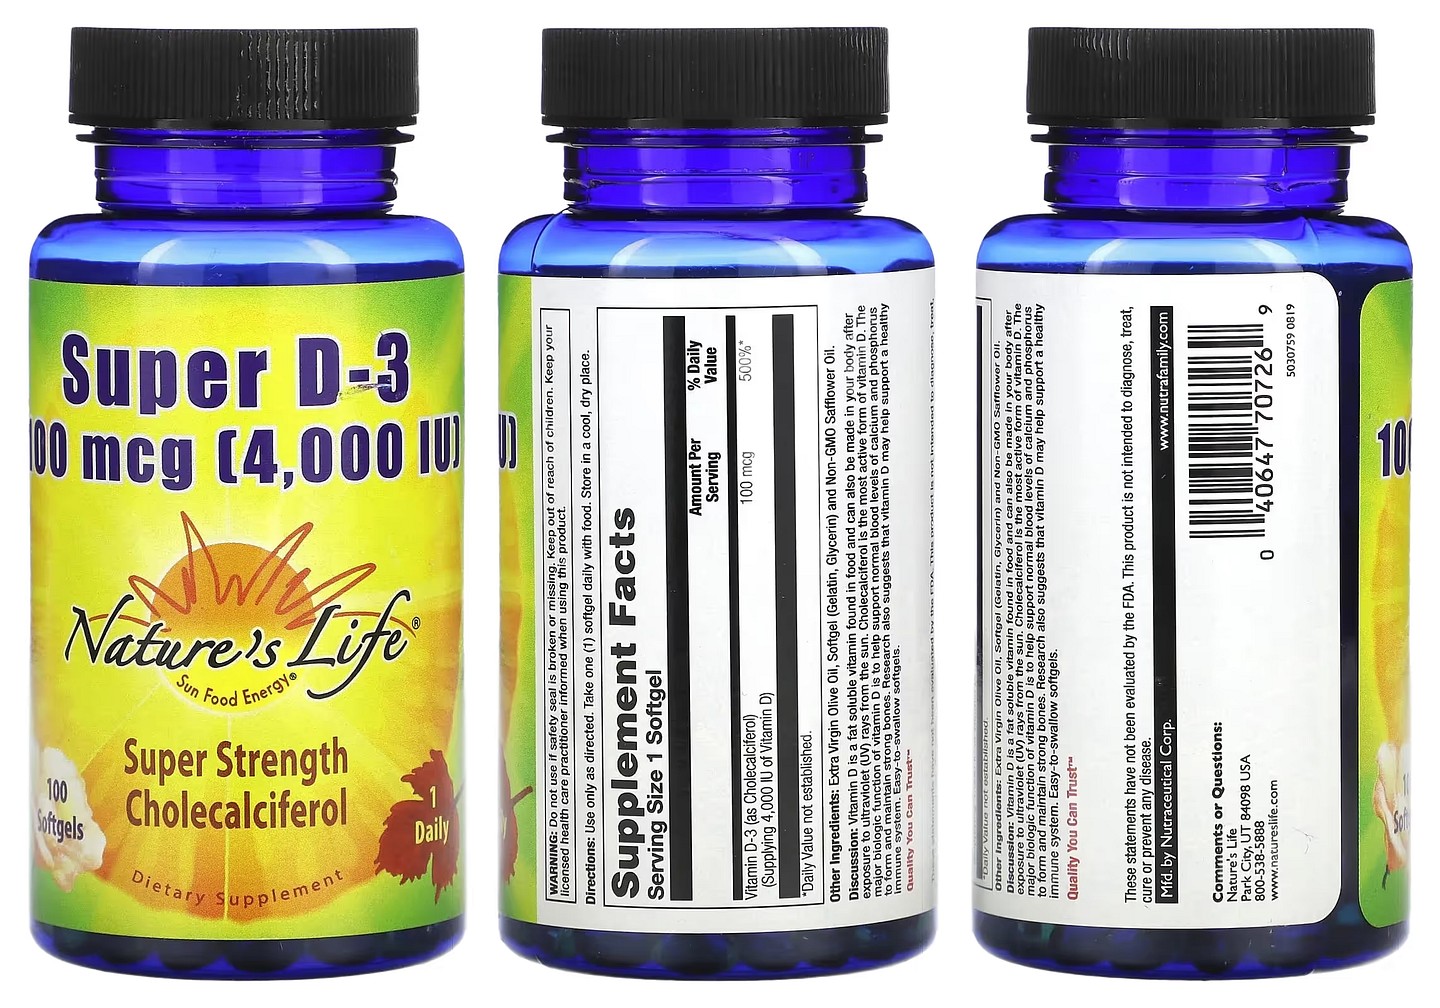 Nature's Life, Super D-3 packaging